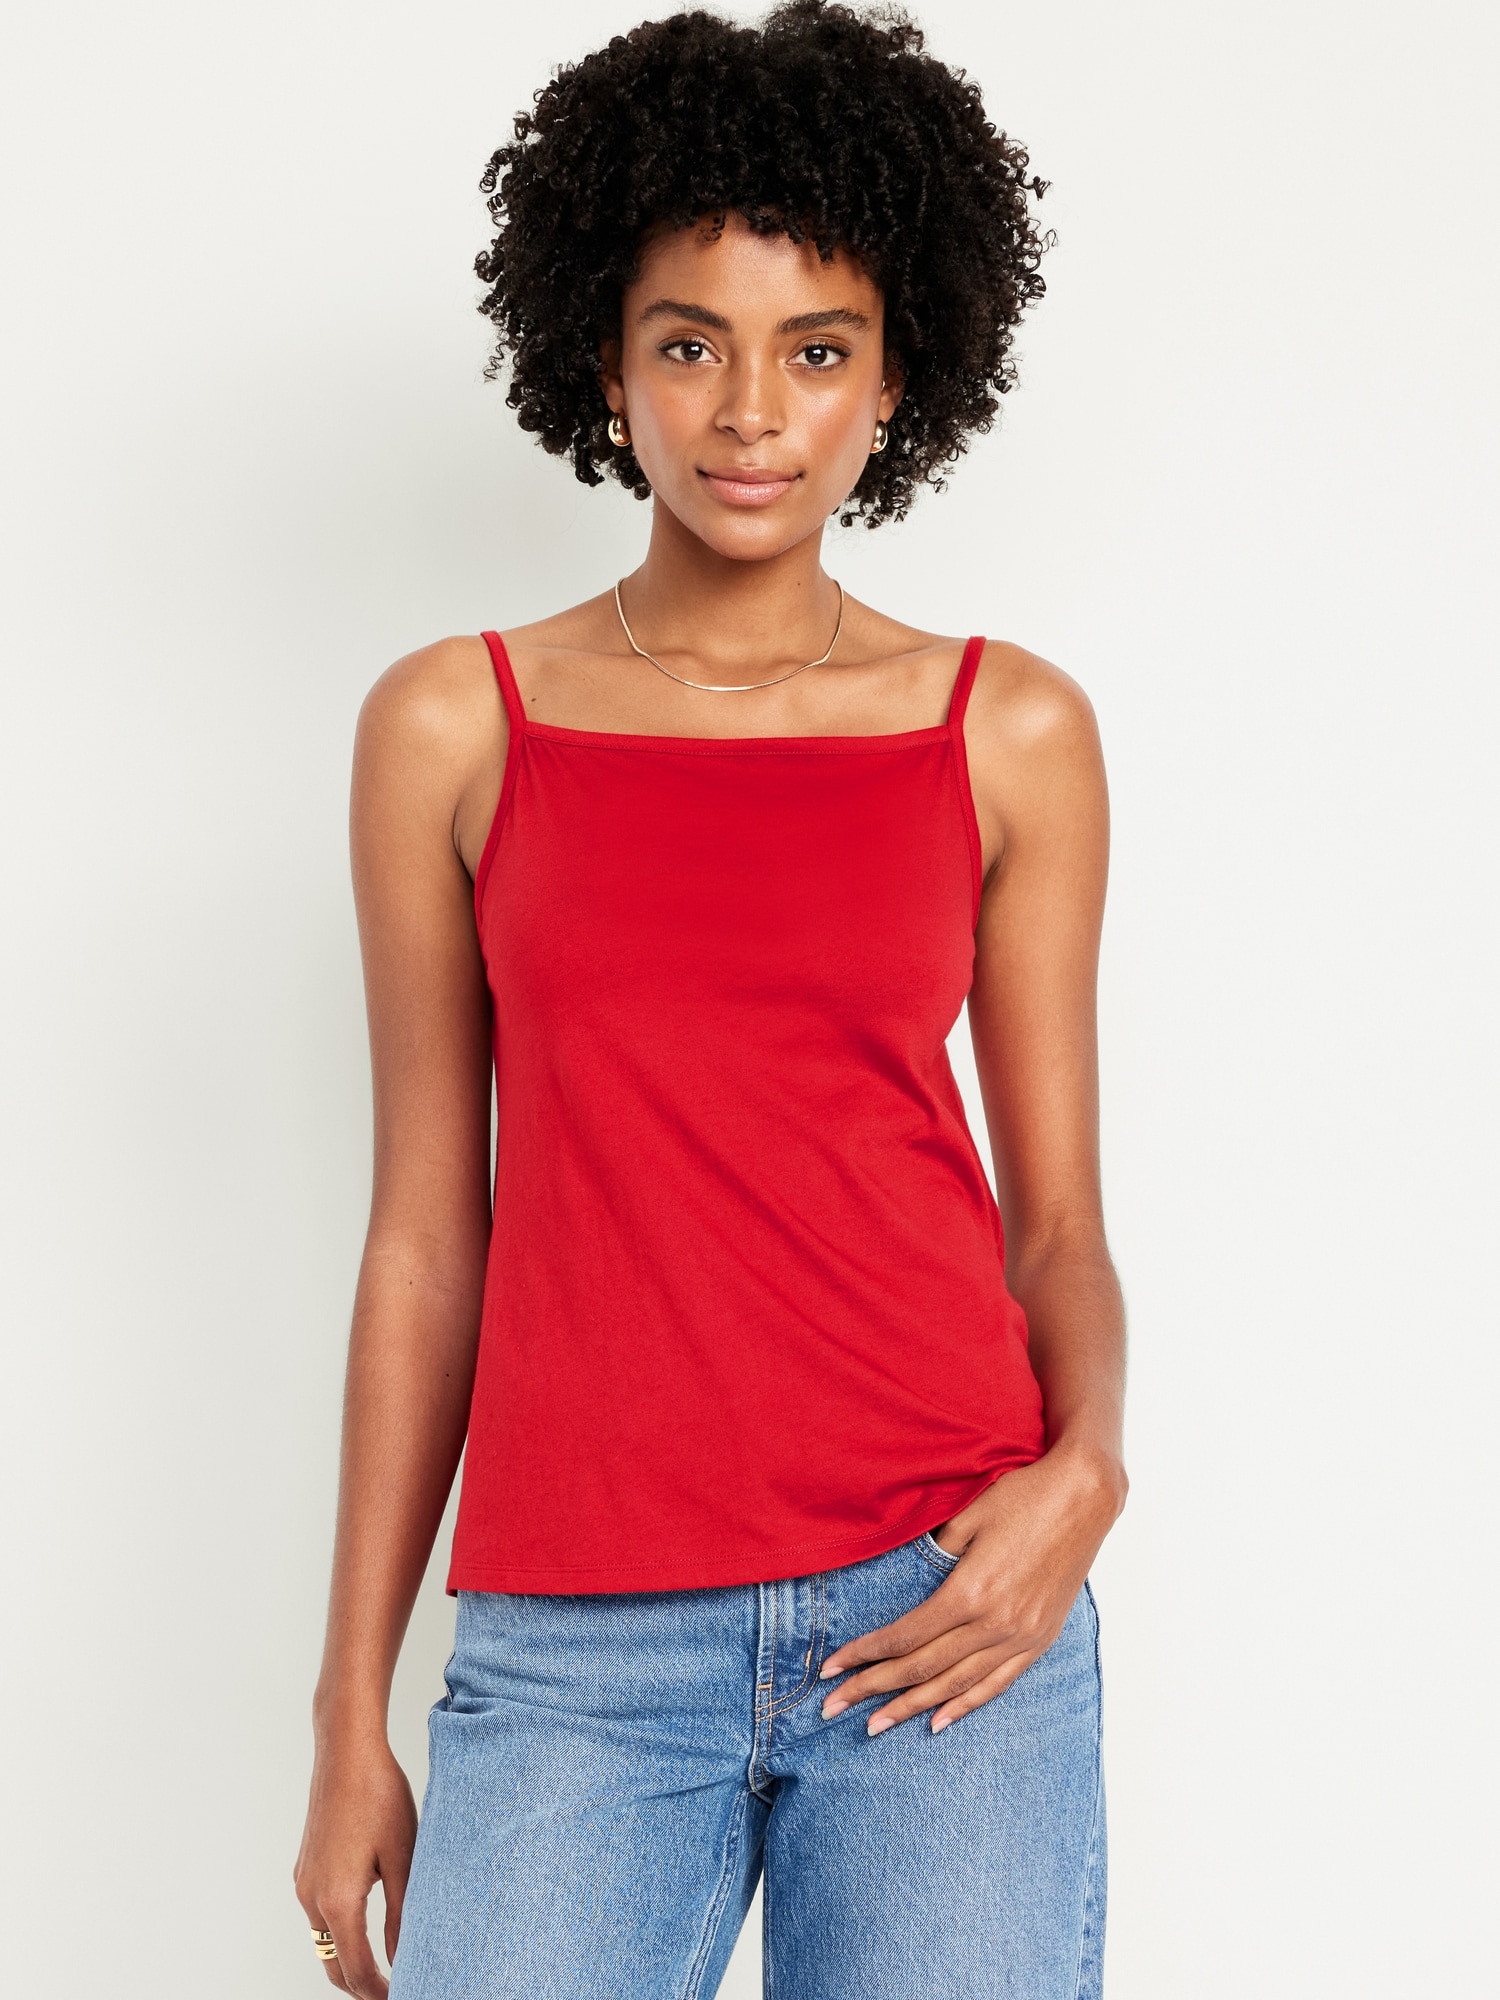 Relaxed Cami Tank Top